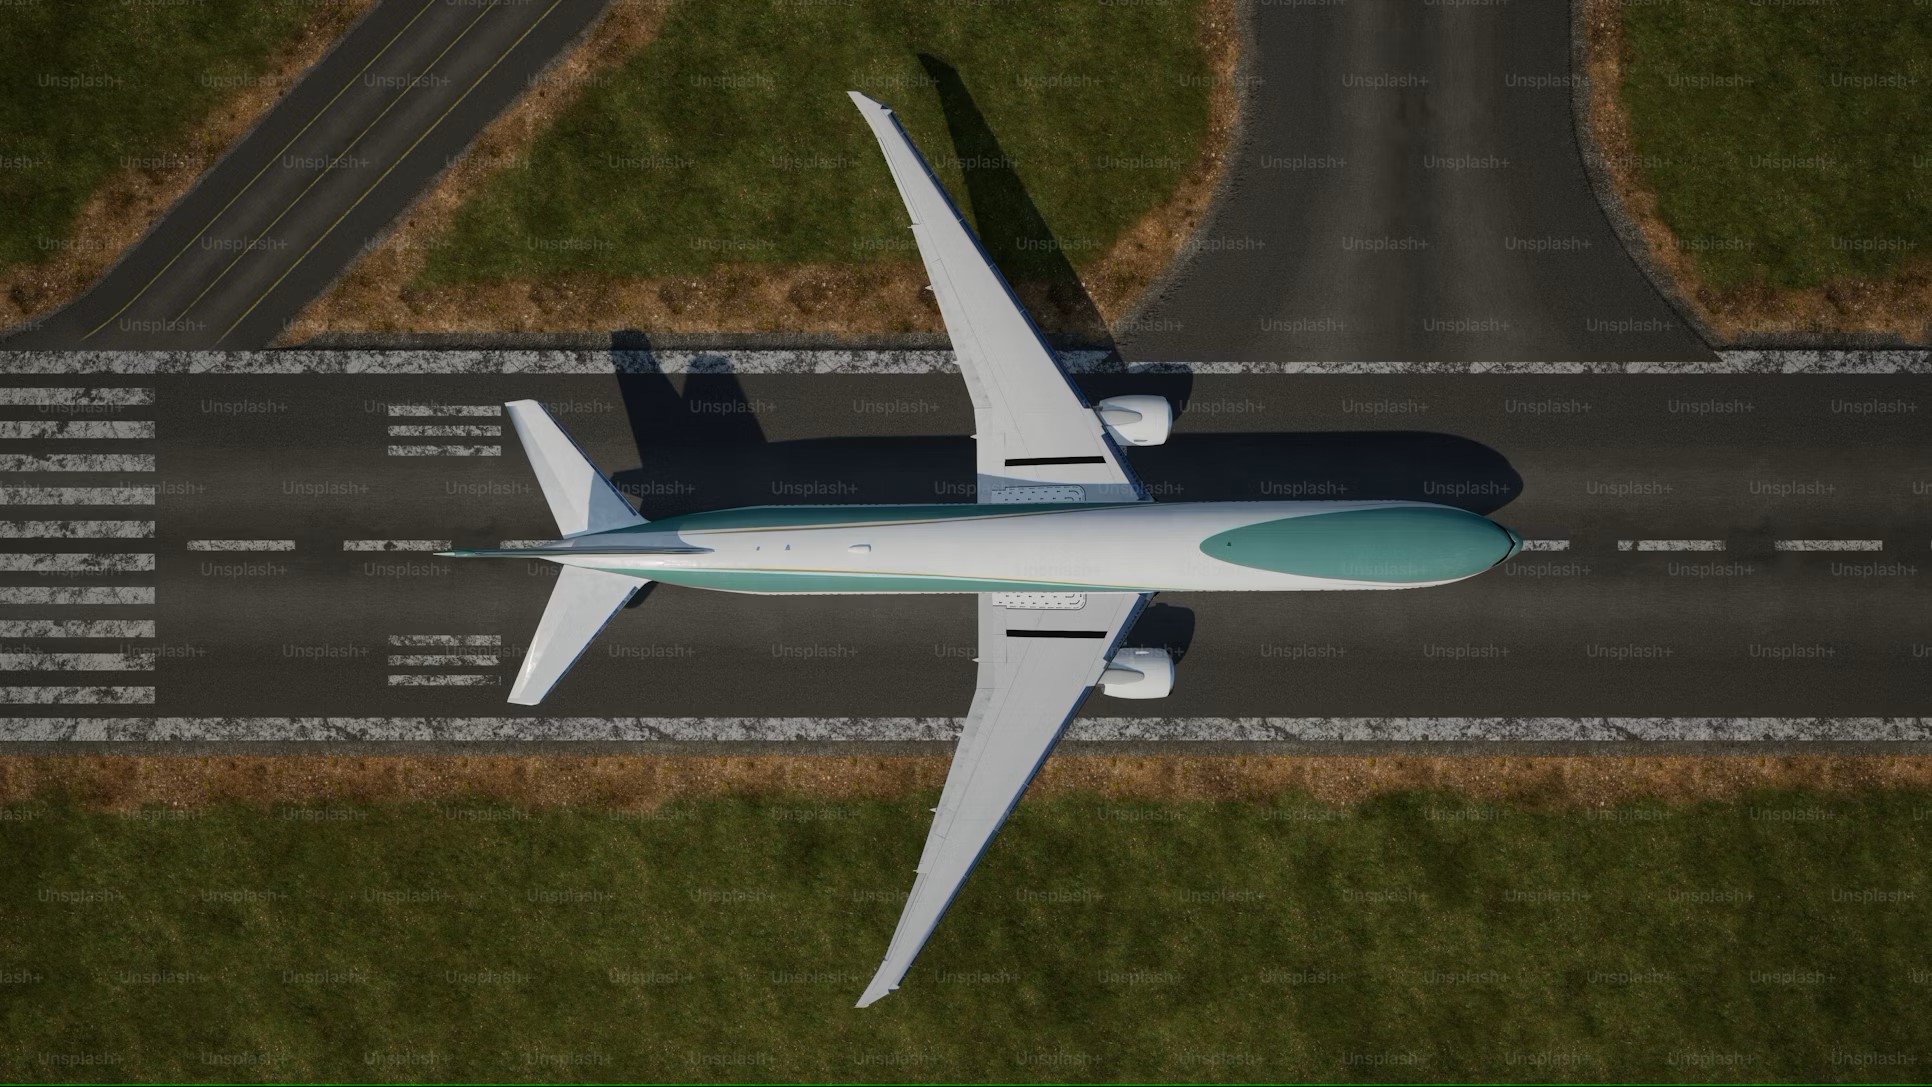 Aerial view of a commercial airplane on a runway, symbolizing challenges faced by a Middle Eastern airline in managing employee travel. TCG Digital's solution integrated SAP's Employee Central, Accelaero for flight tracking, and Active Directory for authentication into a user-friendly ticketing portal for eligibility, policy adherence, booking, and data analysis.